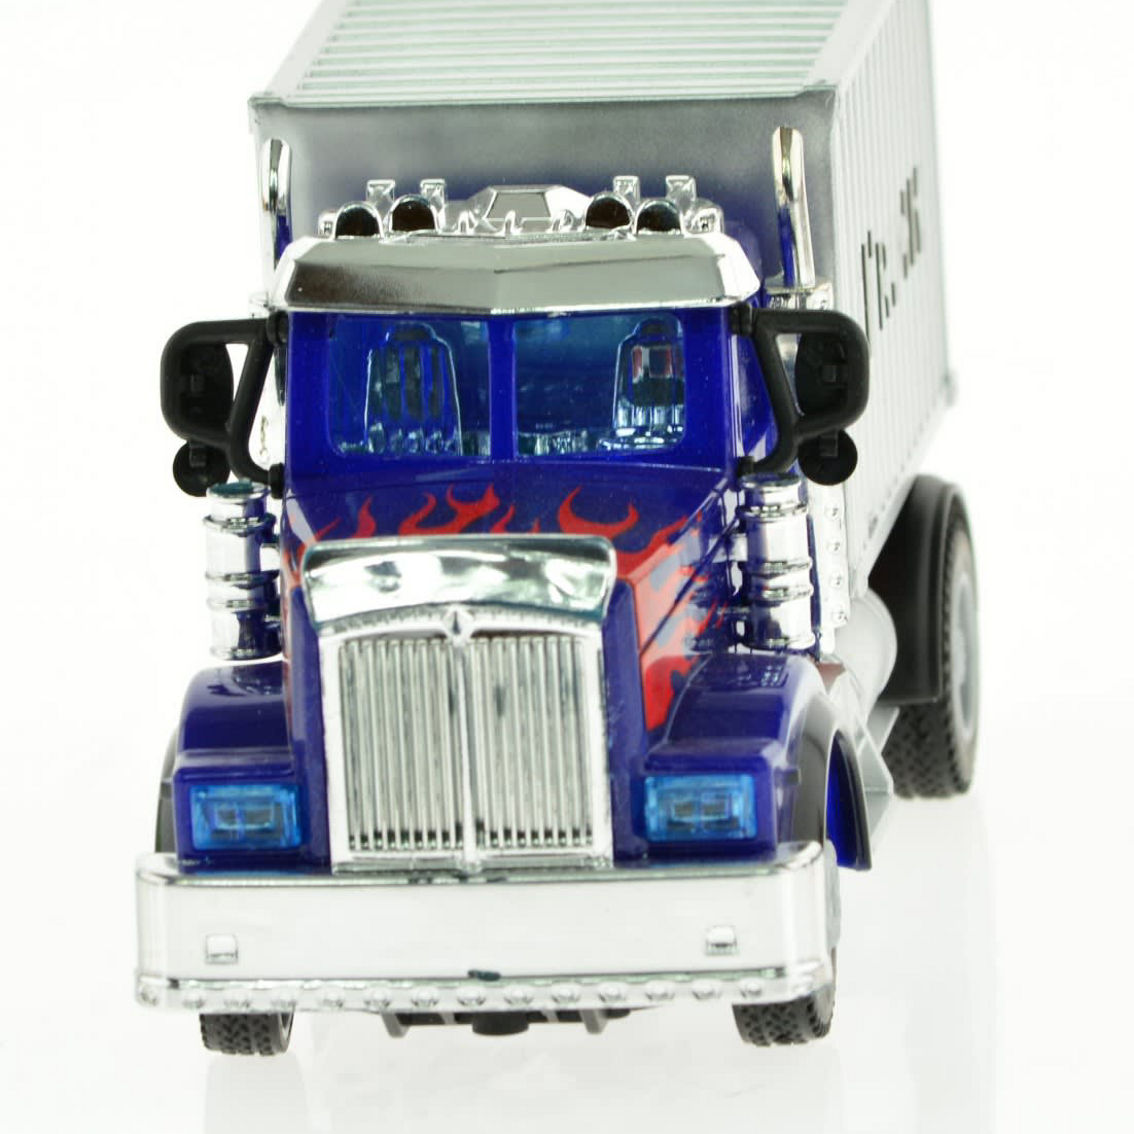 CIS-AG56162B2 2.4G 1:64 RC Transportation container Truck with lights and sound - Image 4 of 5